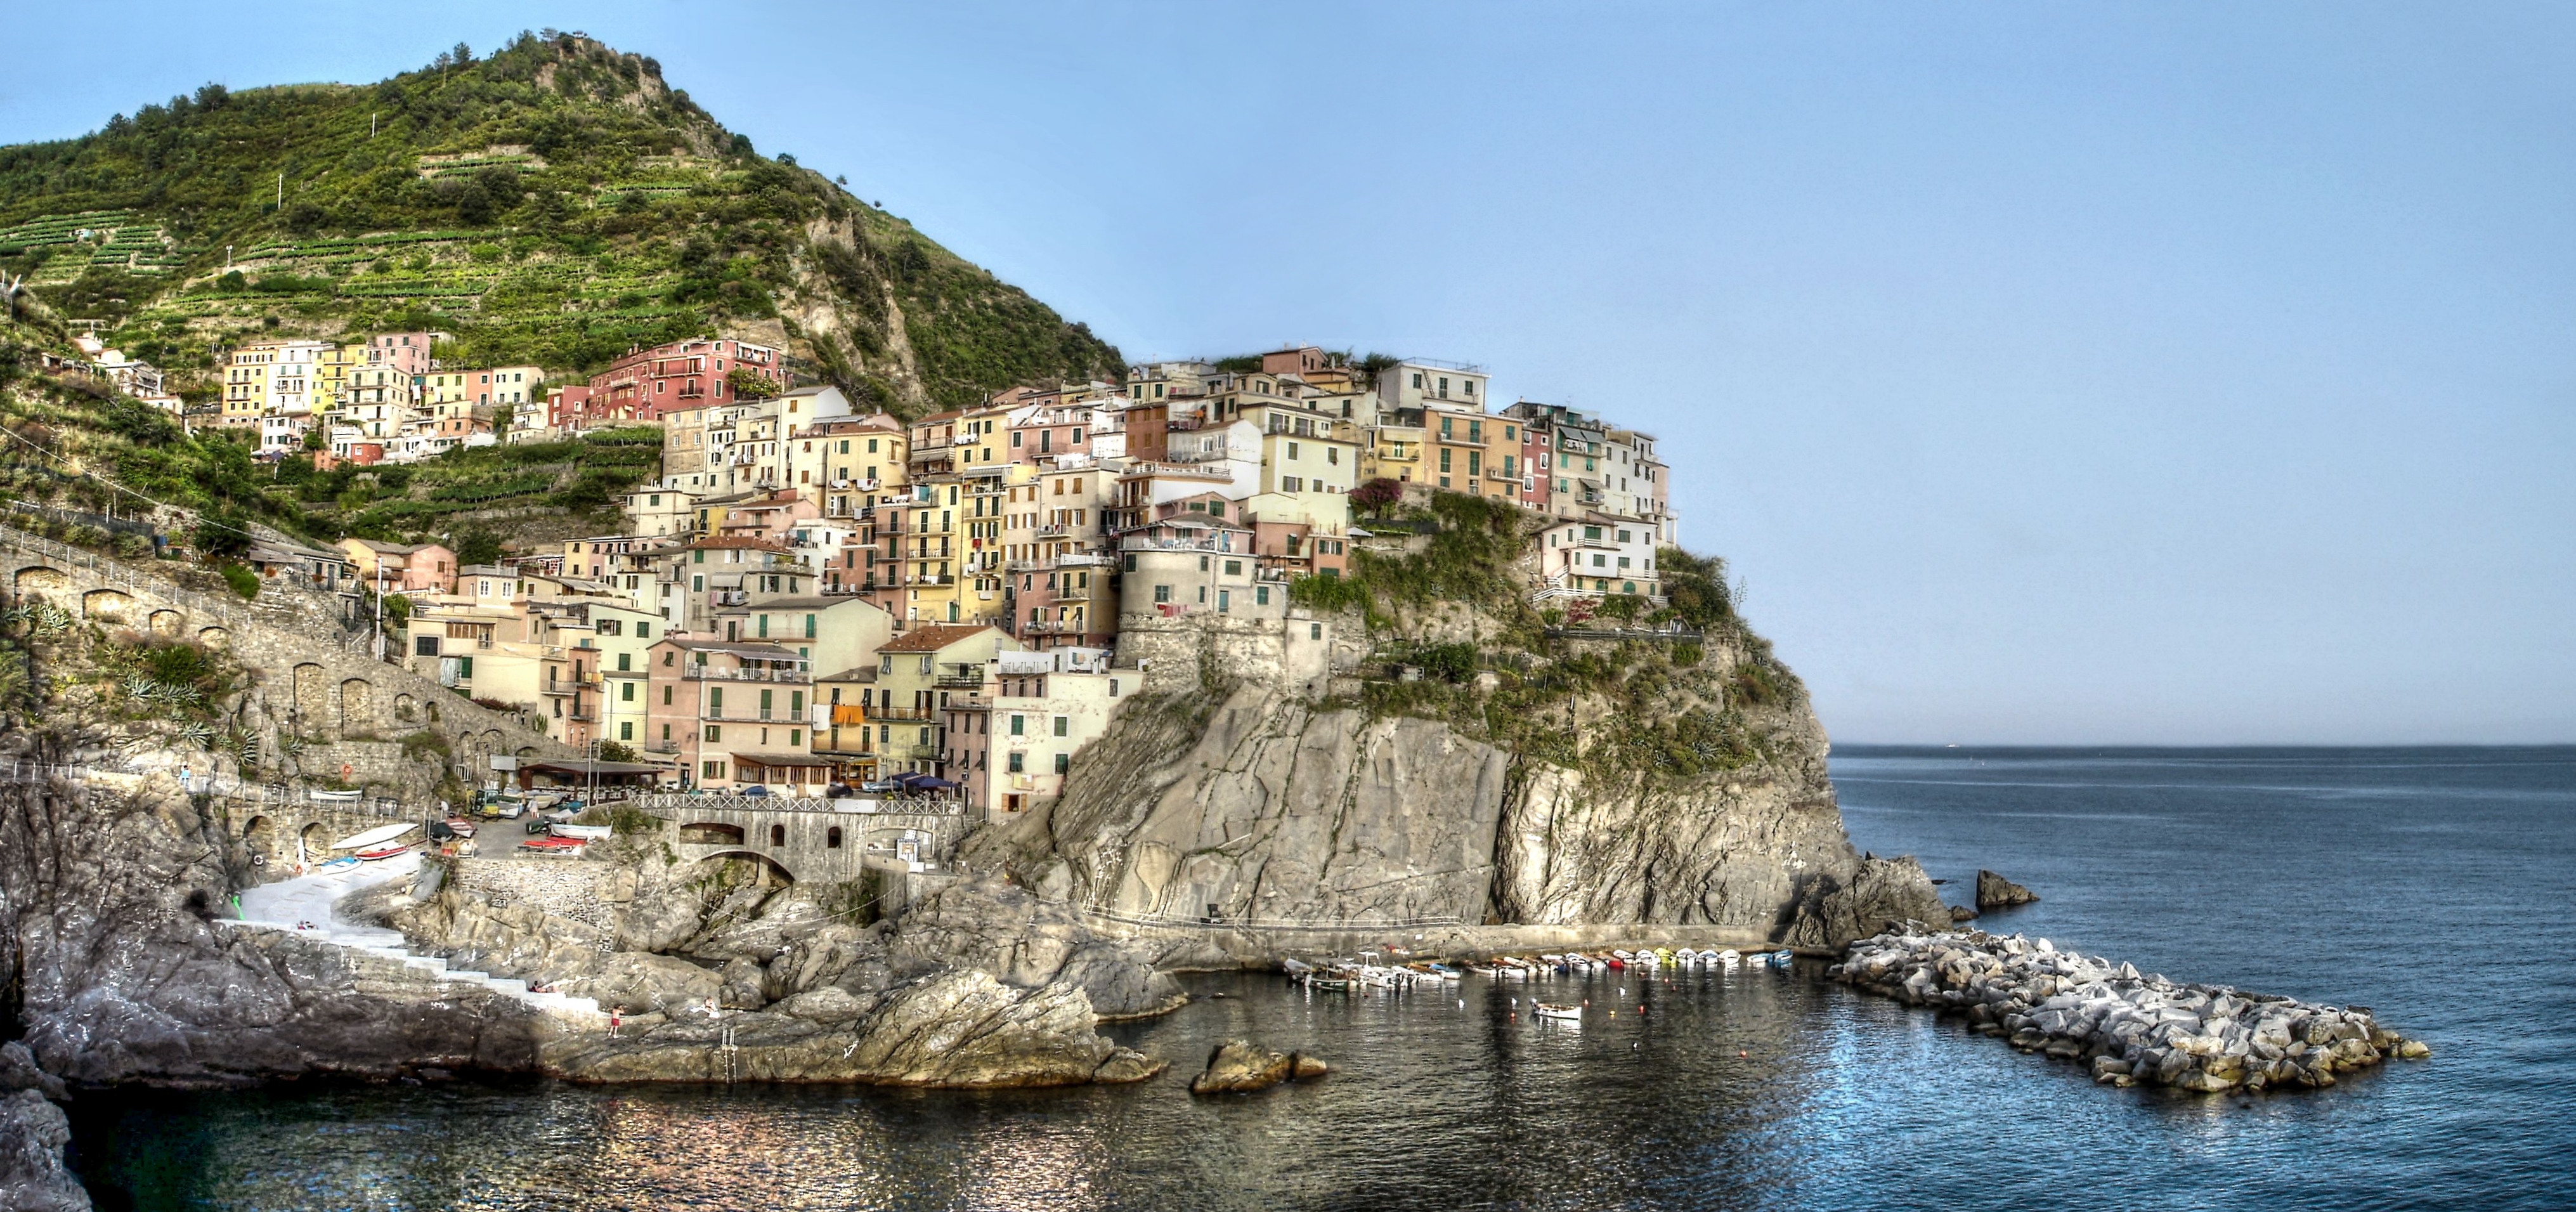 Hike in the Cinque Terre.jpg